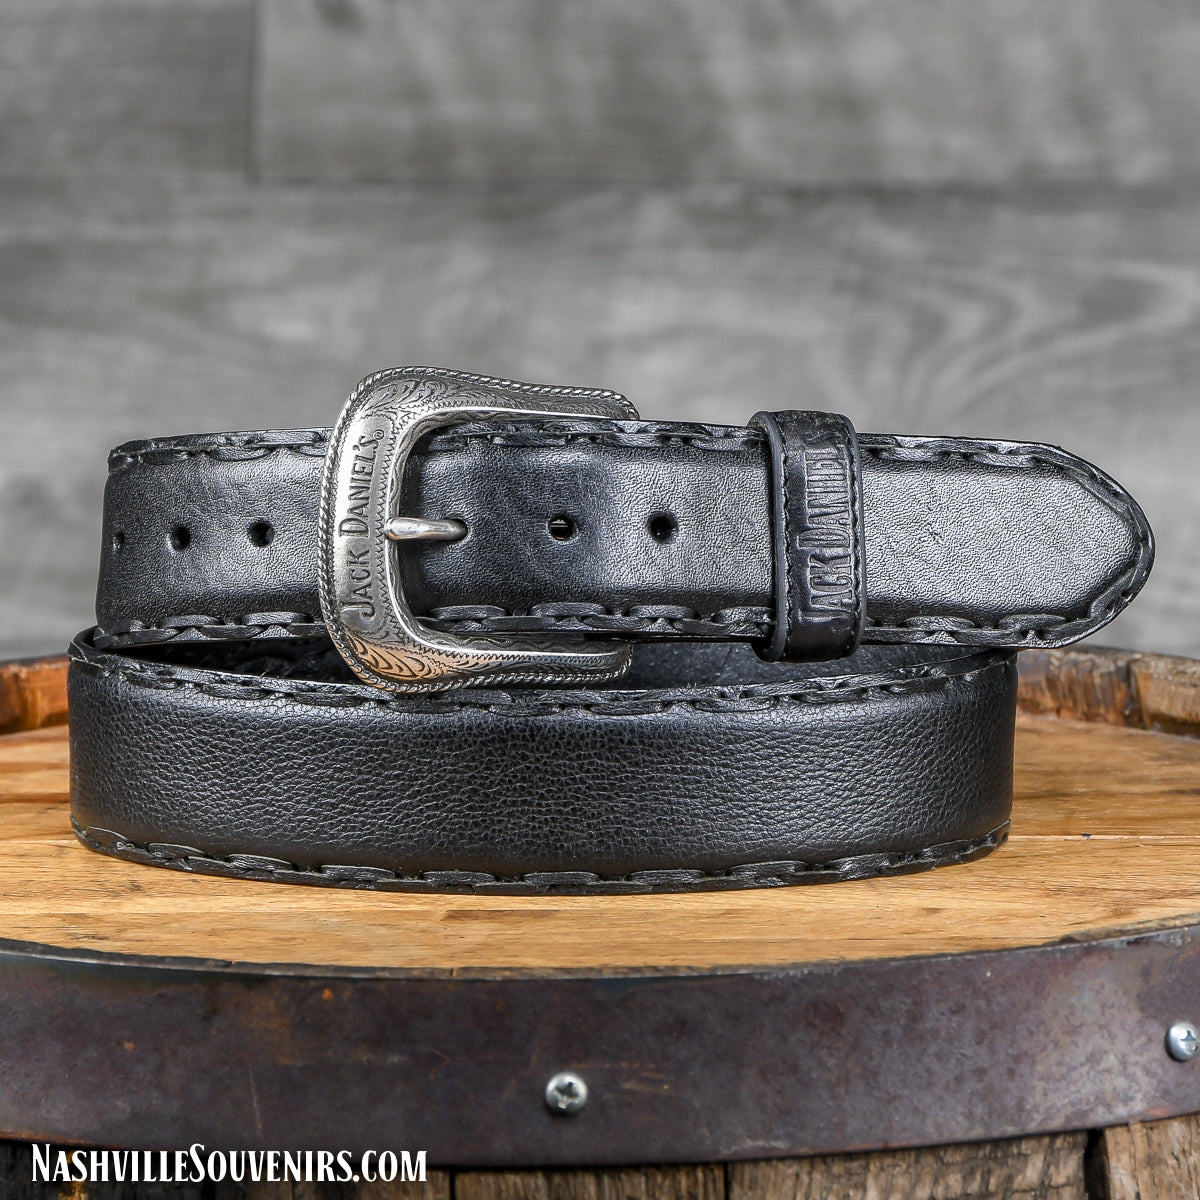 Officially licensed Jack Daniels Belt with Woven Edges and Silver Buckle in genuine black fullgrain leather. Get yours today with FREE SHIPPING on all US orders over $75!